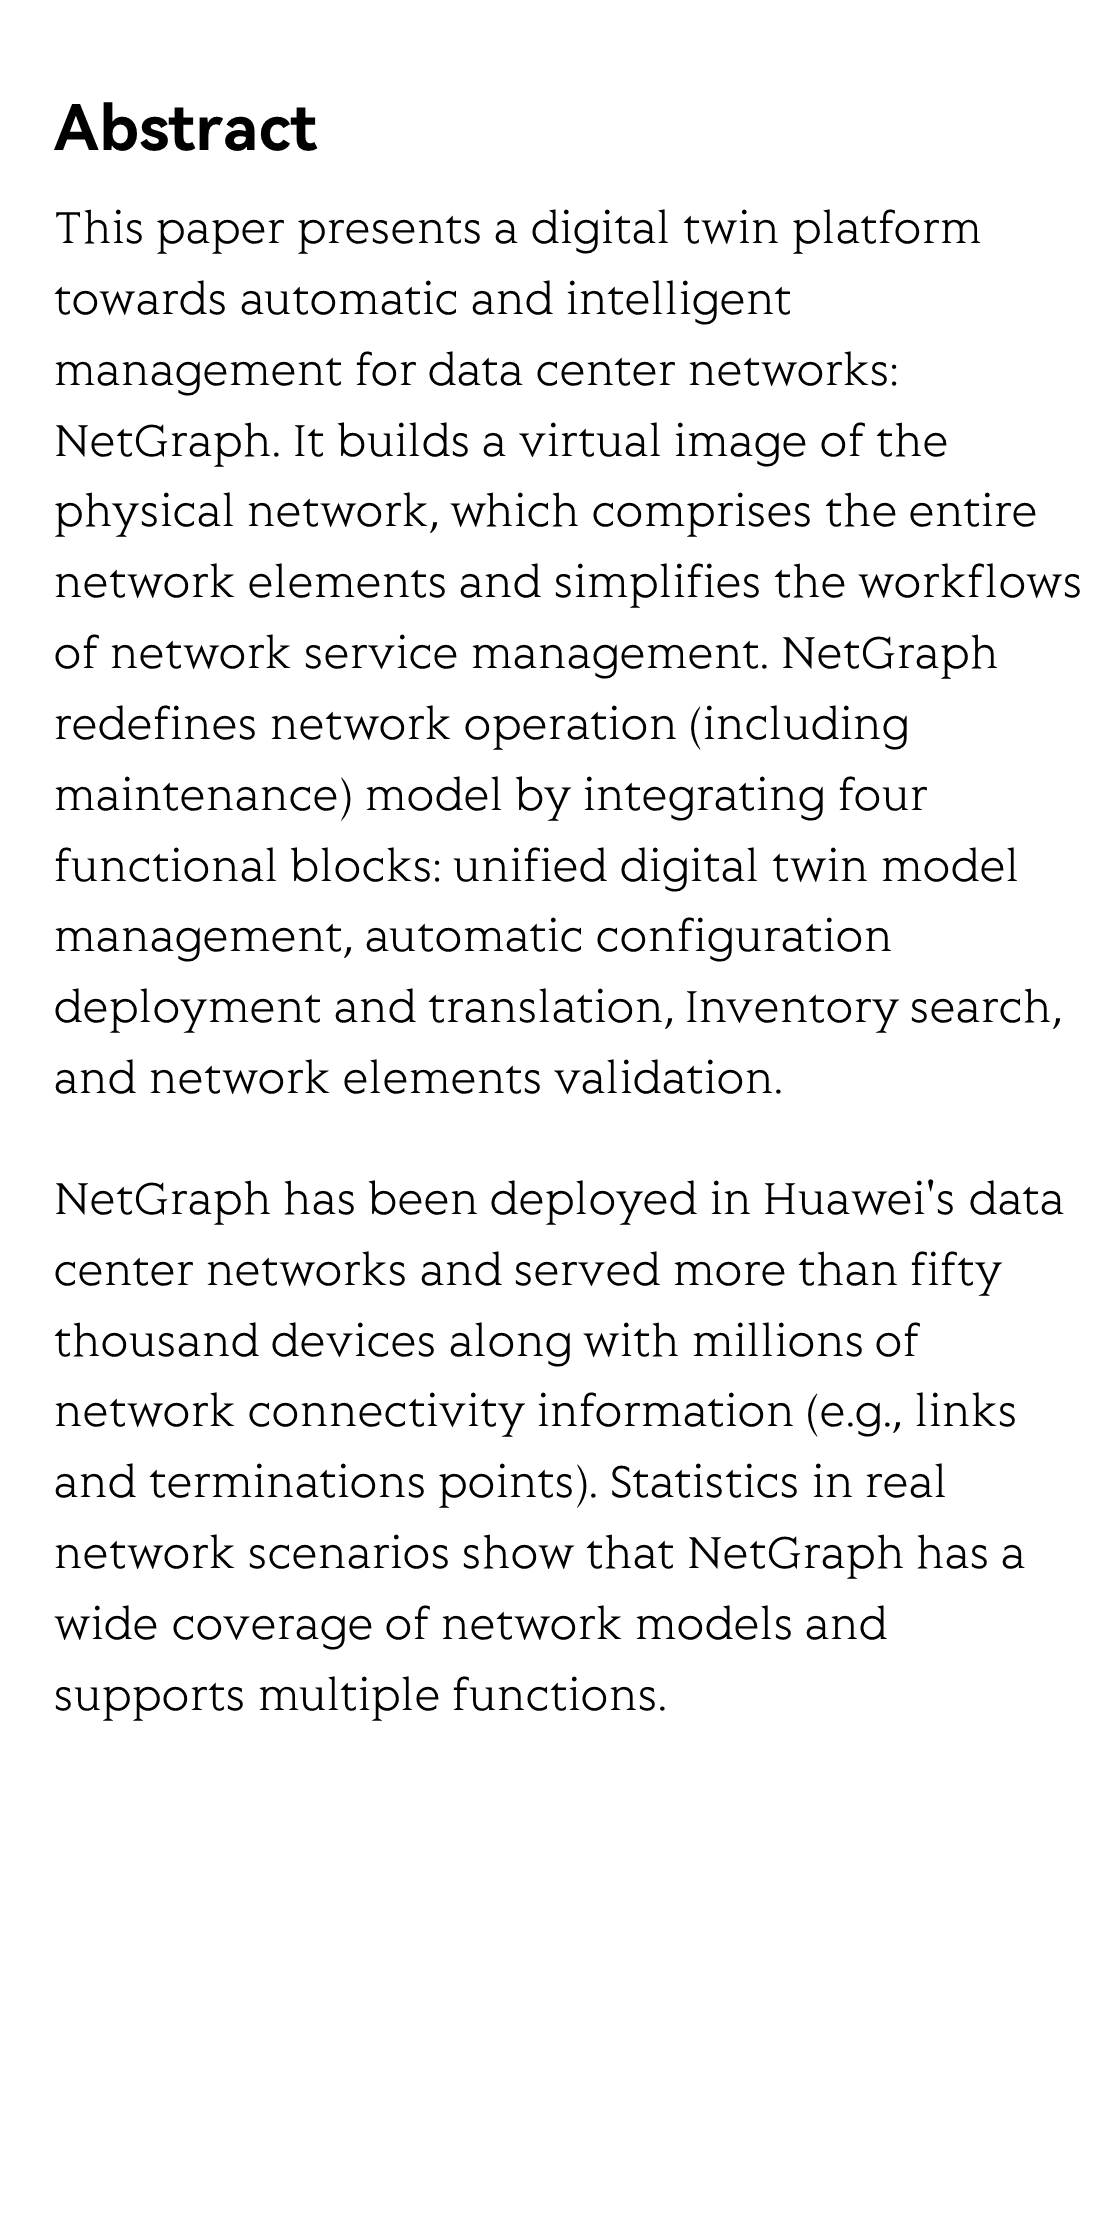 NetGraph: An Intelligent Operated Digital Twin Platform for Data Center Networks_2